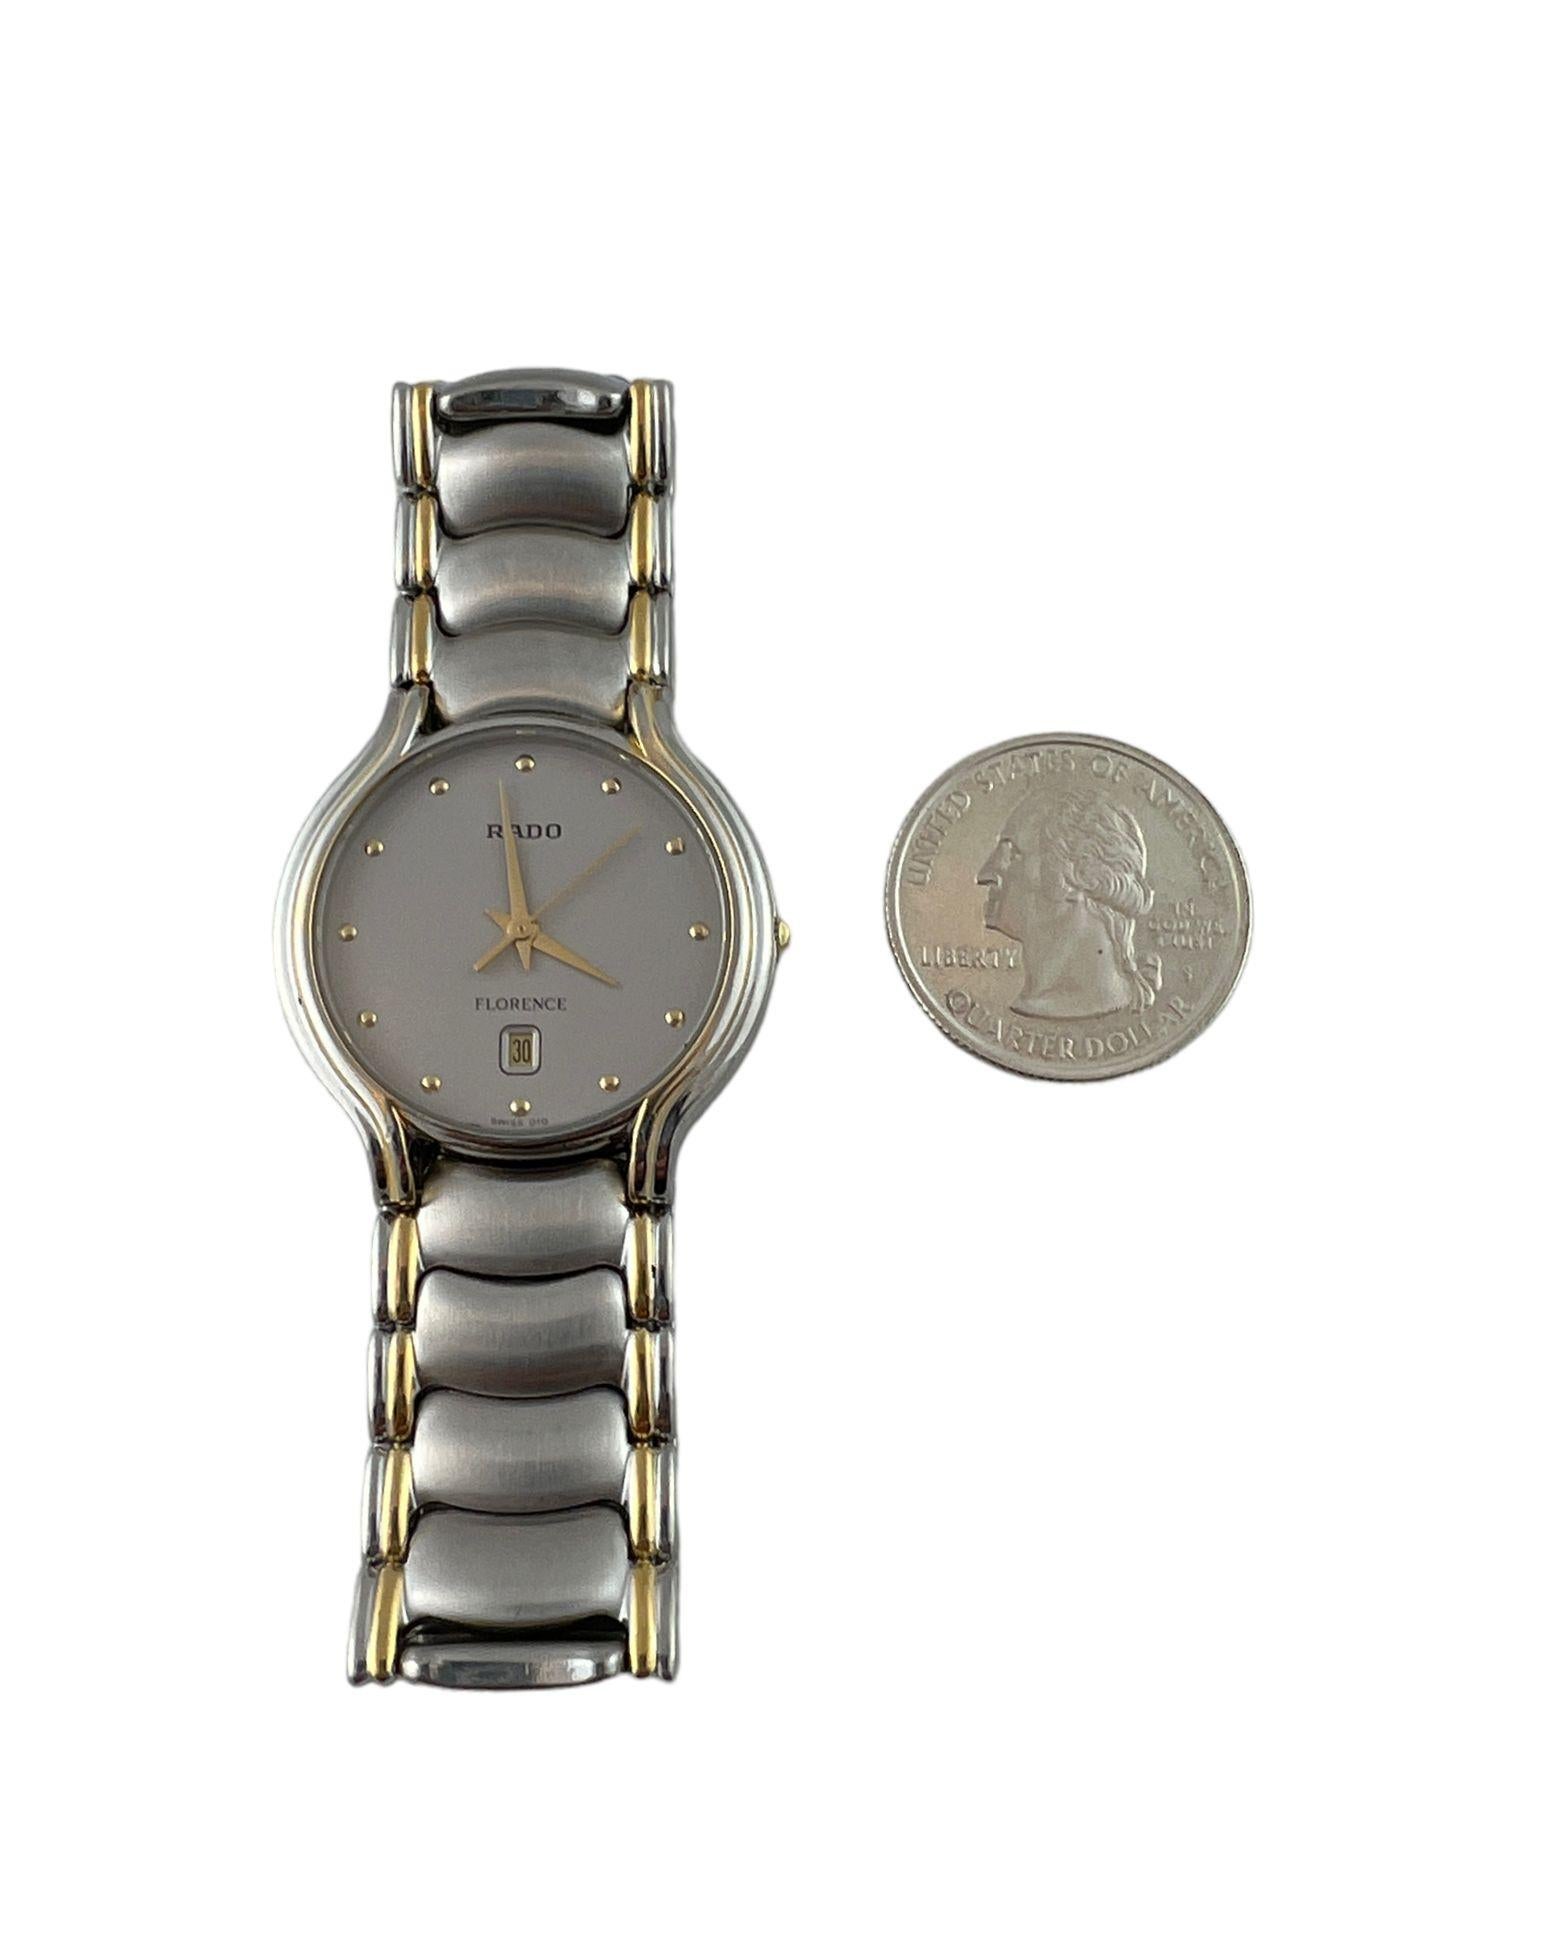 Rado Florence Two Tone Unisex Watch

Model: 129.3644.4
Serial: 03037930

This Rado watch is from the Florence collection.

32mm stainless steel case

quartz movement

silver color with gold accents

gray dial with gold markers. Date is at the